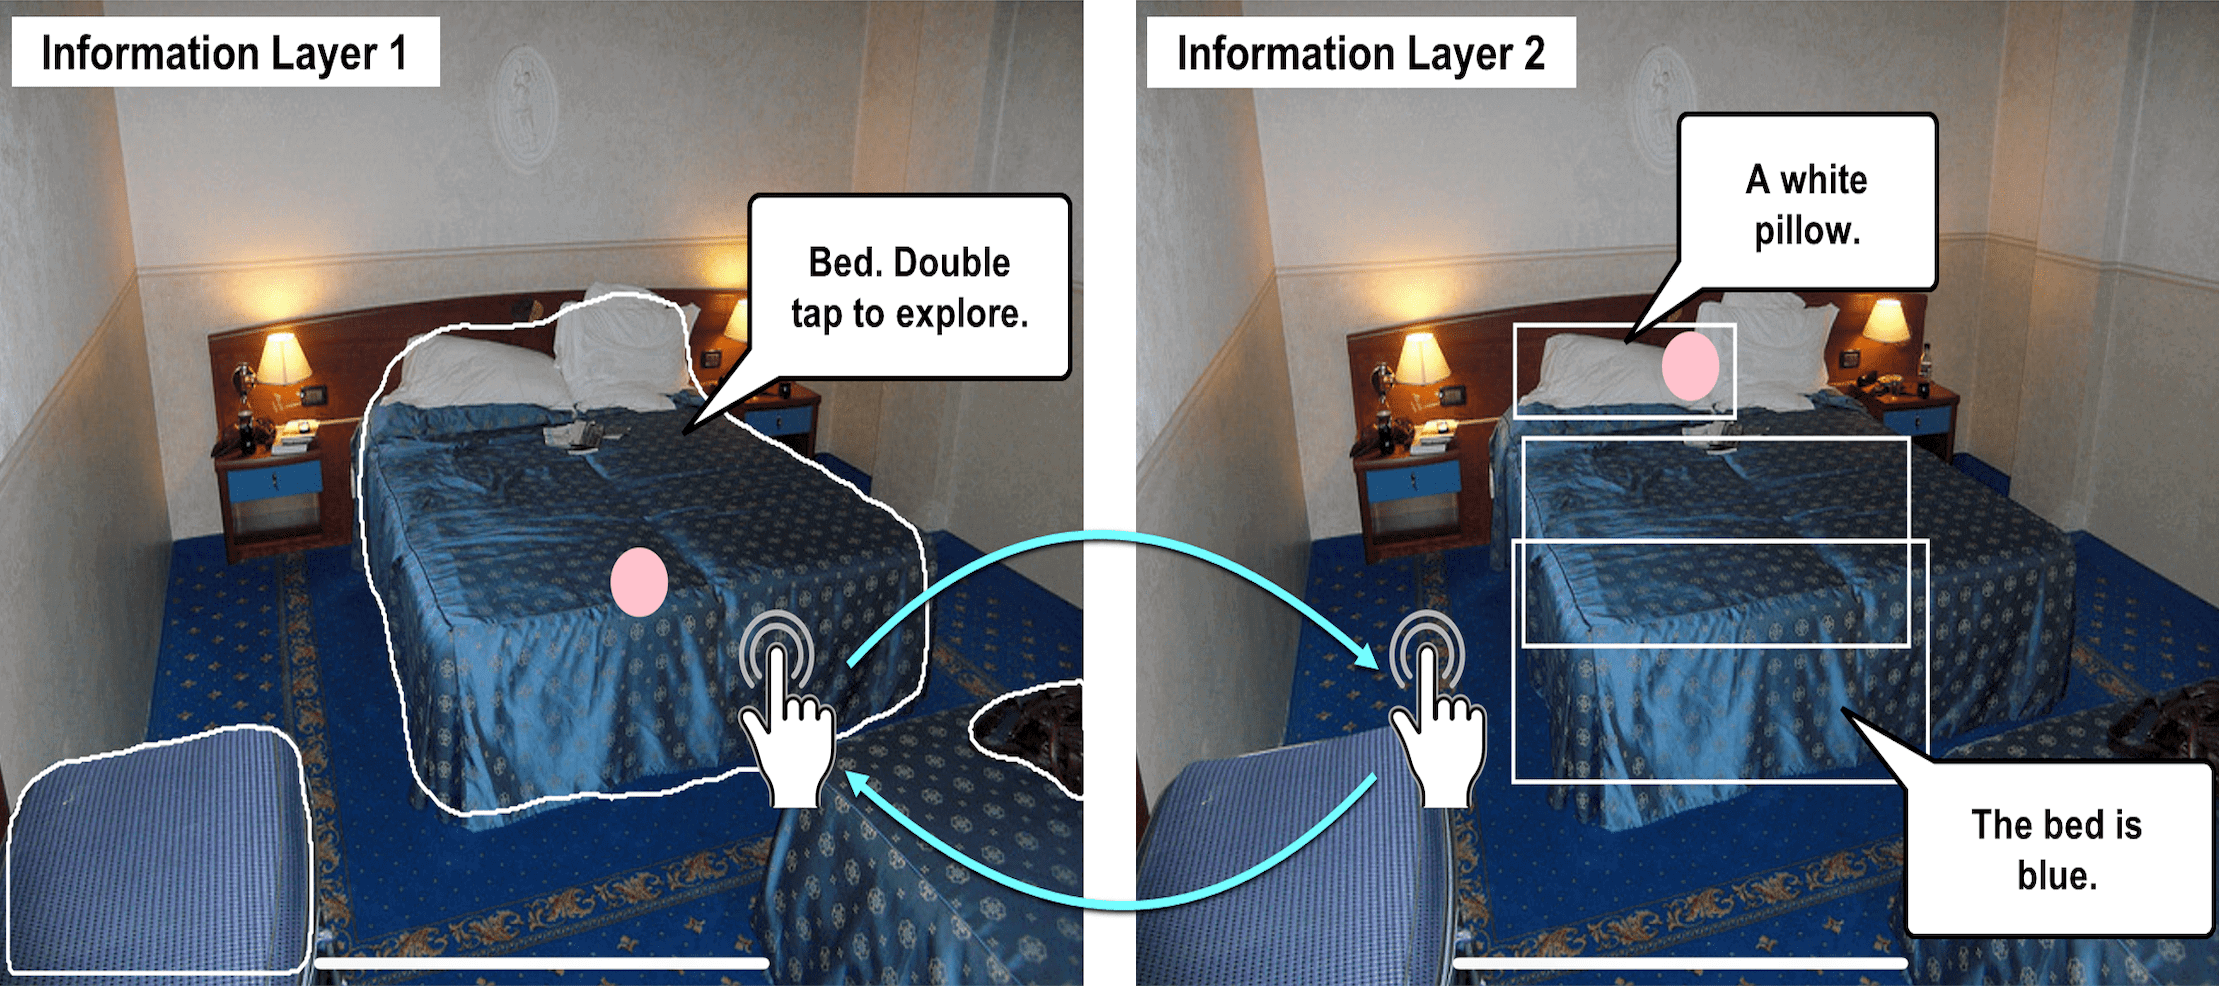 Image Description - A view is divided by a vertical white line in the middle. On the left is an image of a bed with a white outline around it. A speech bubble reads 'Bed. Double tap to explore'. On the right is the same image of the bed, now with a variety of rectangular bounding boxes around the white pillow and blue sheets. Two speech bubbles read 'A white pillow' and 'The bed is blue'.